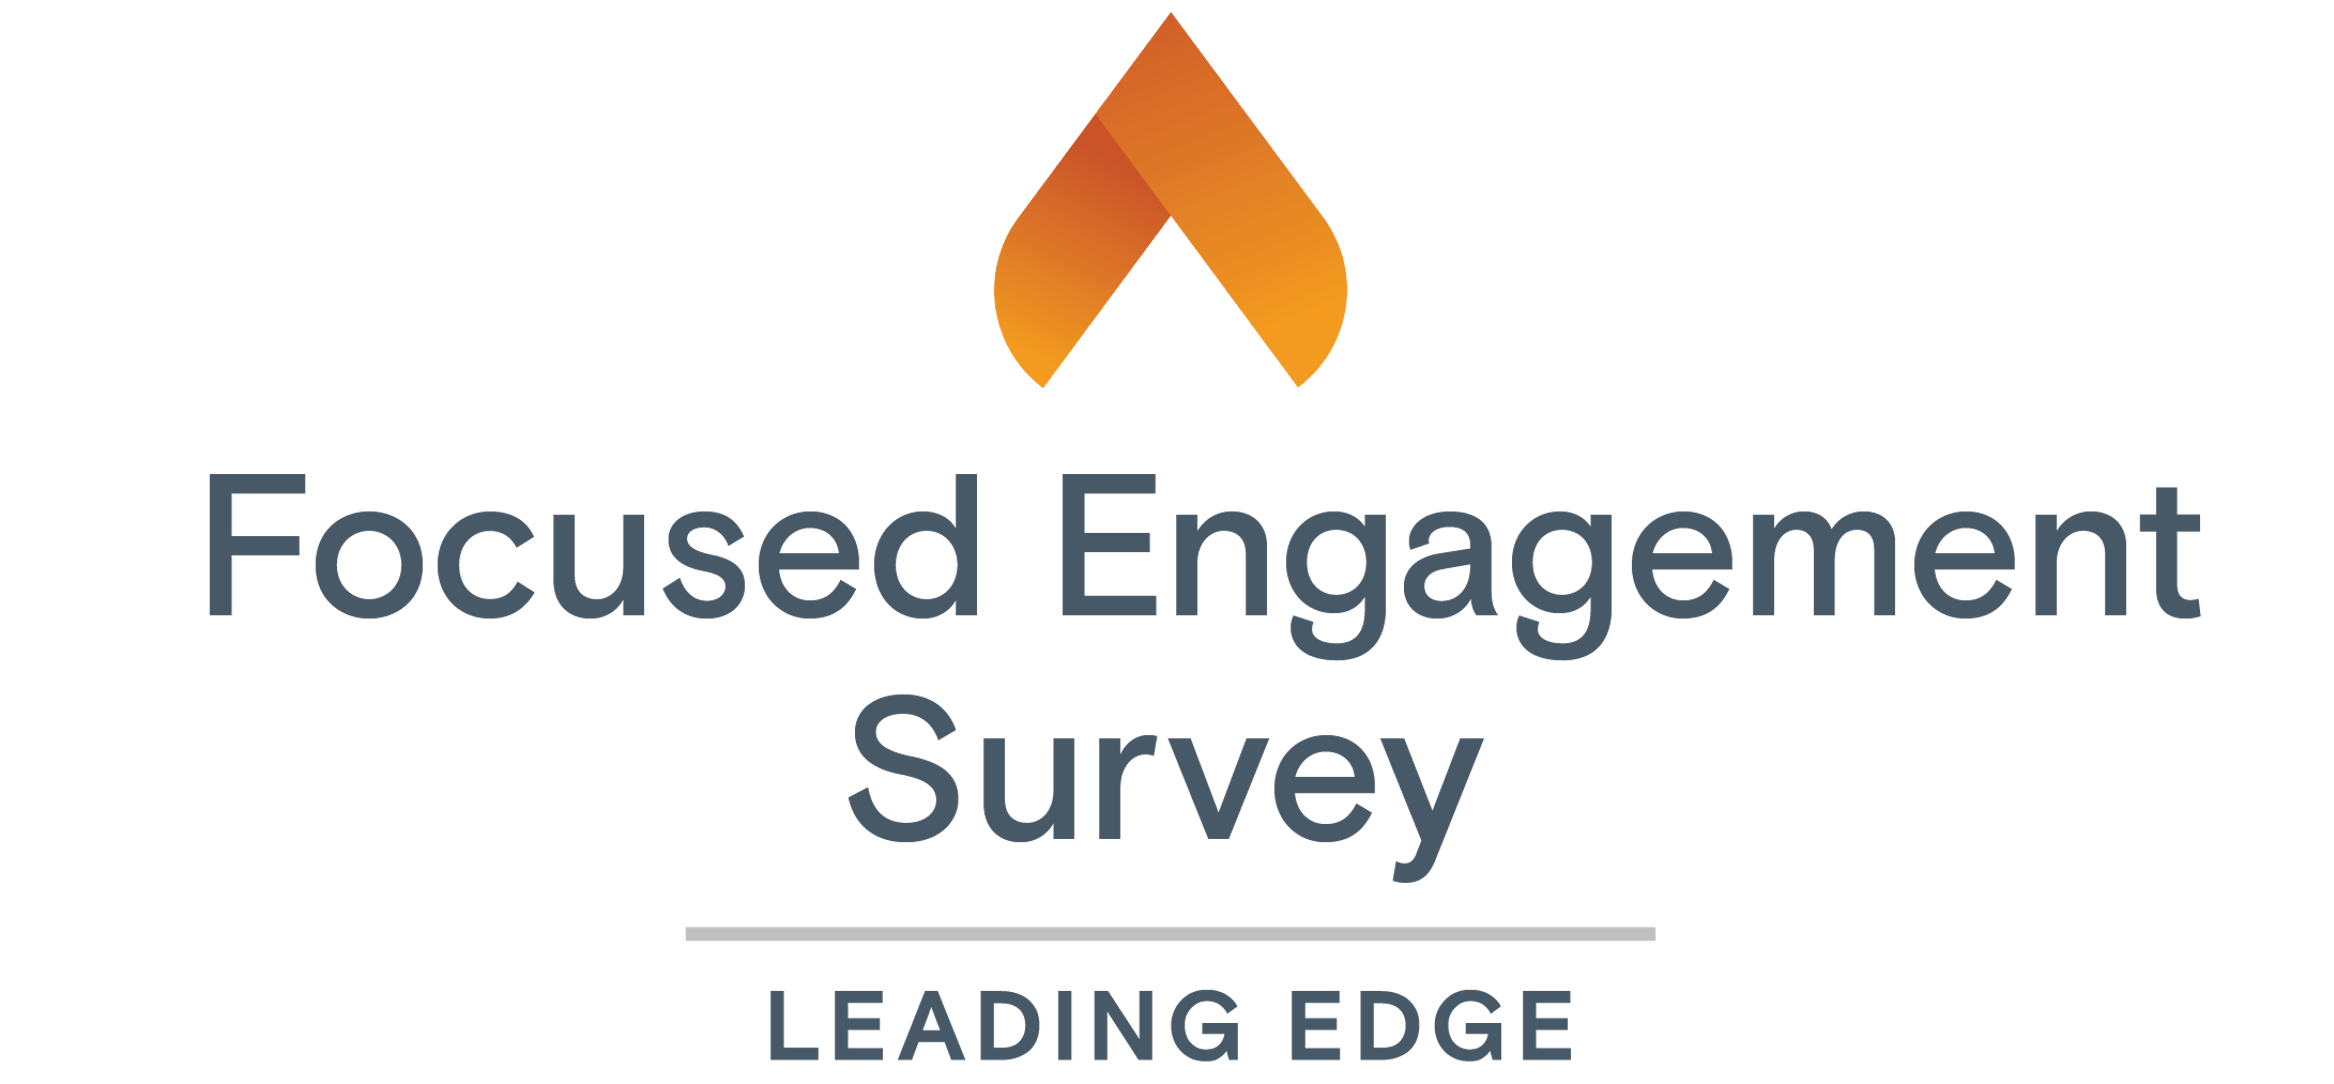 Focused Engagement Survey by Leading Edge